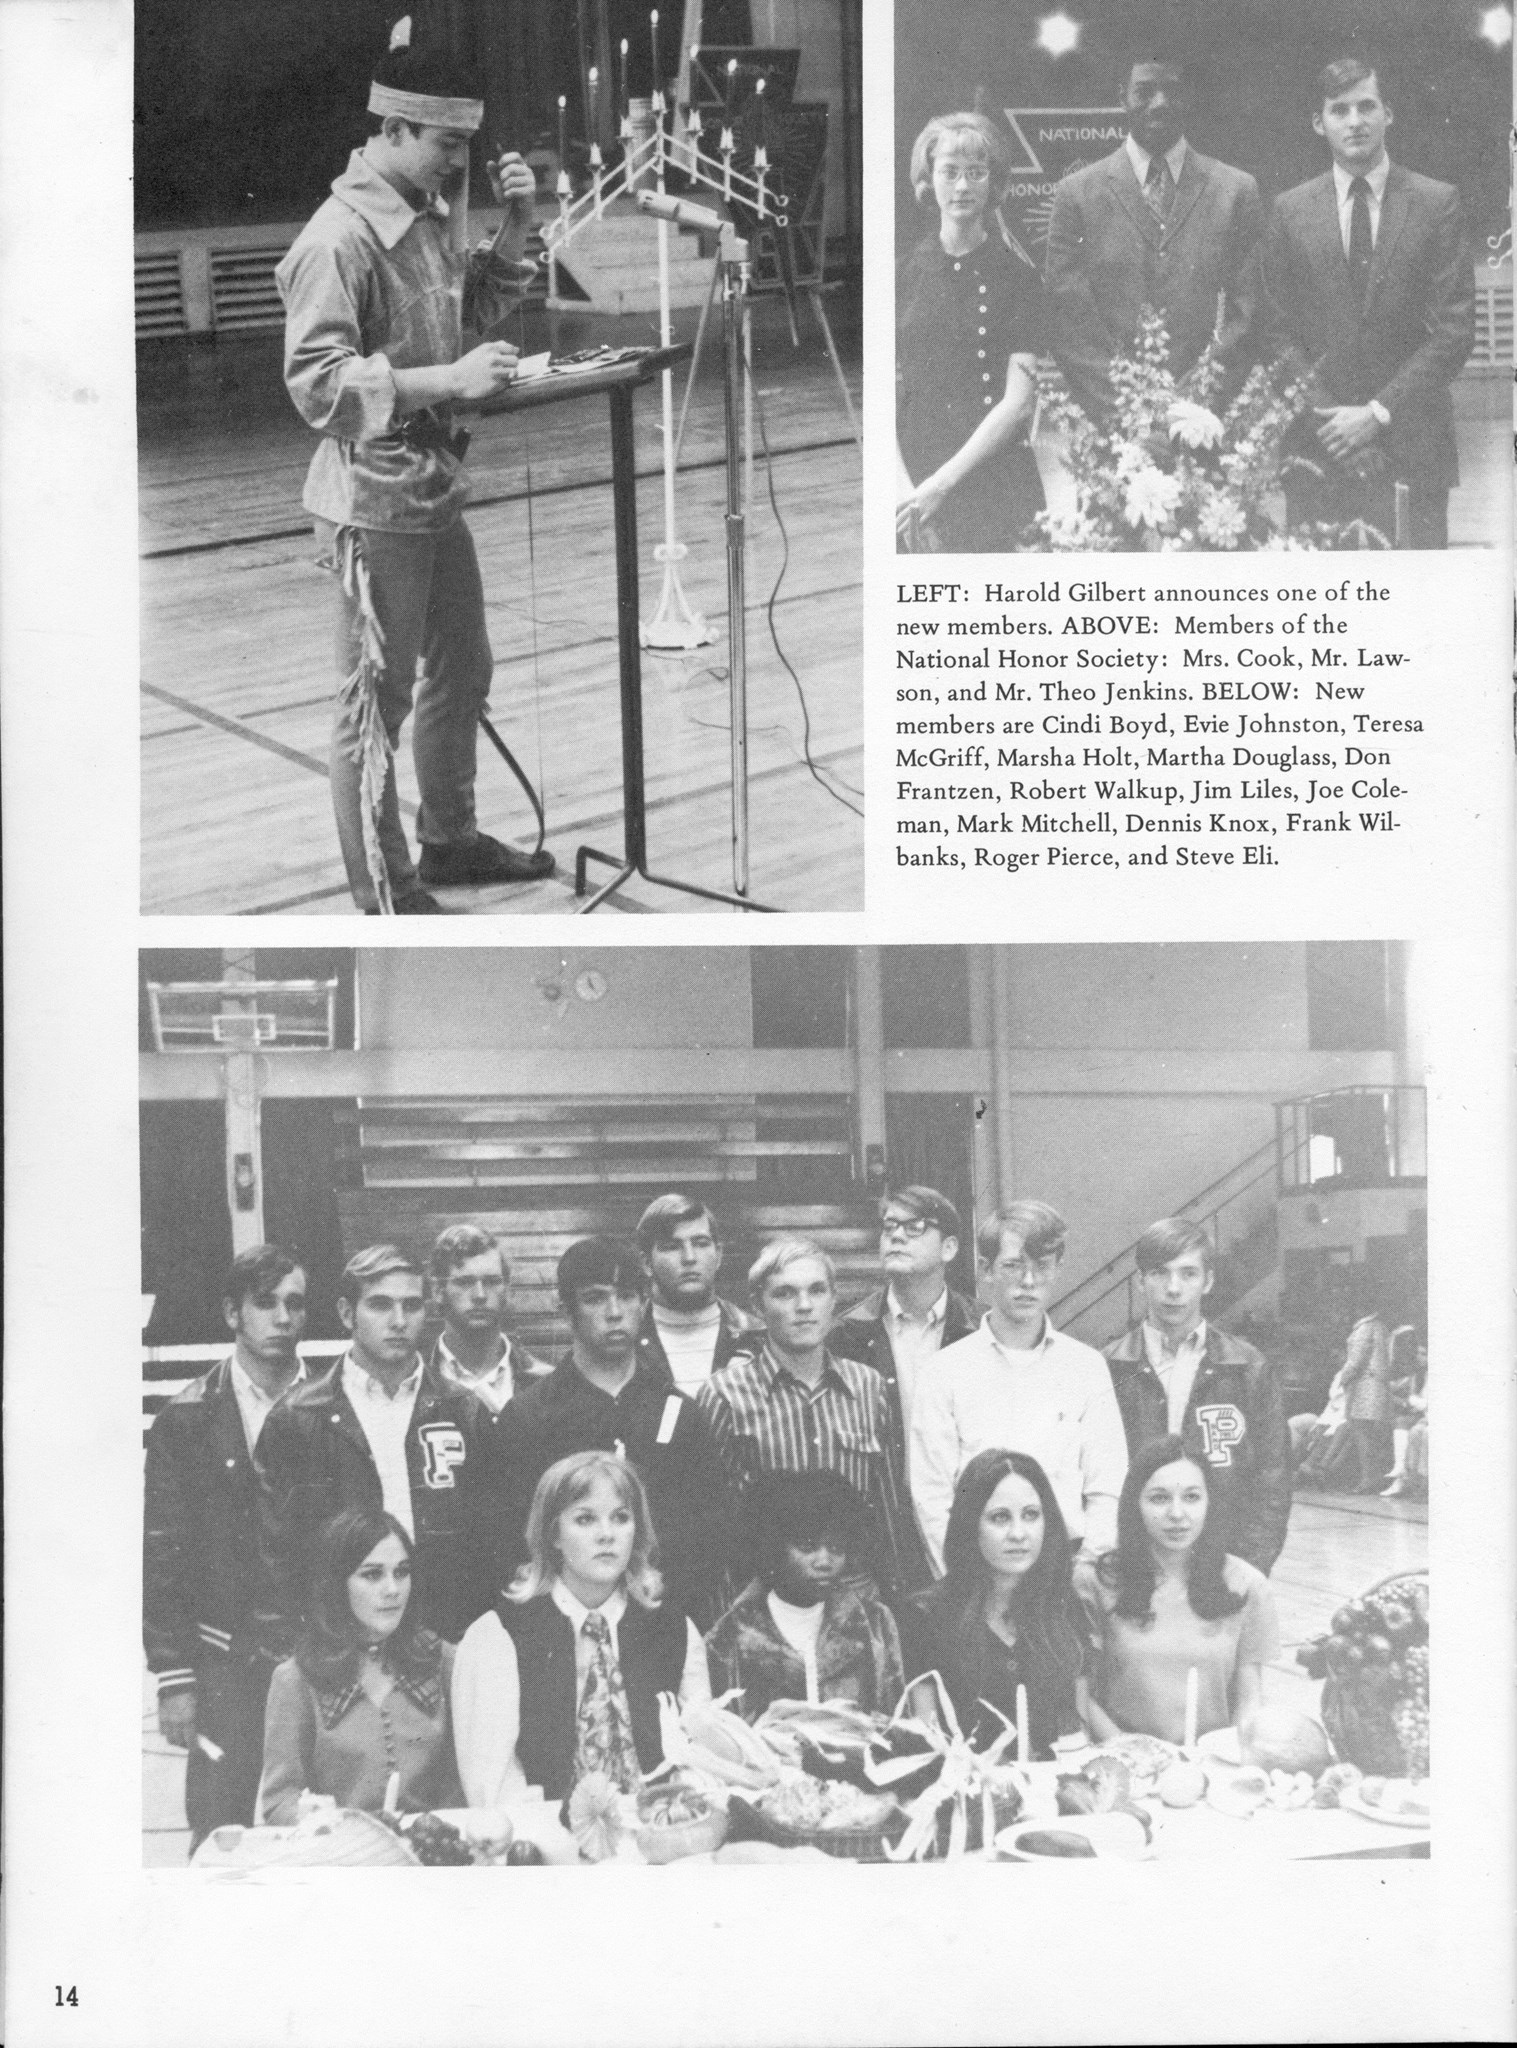 ../../../Images/Large/1971/Arclight-1971-pg0014.jpg